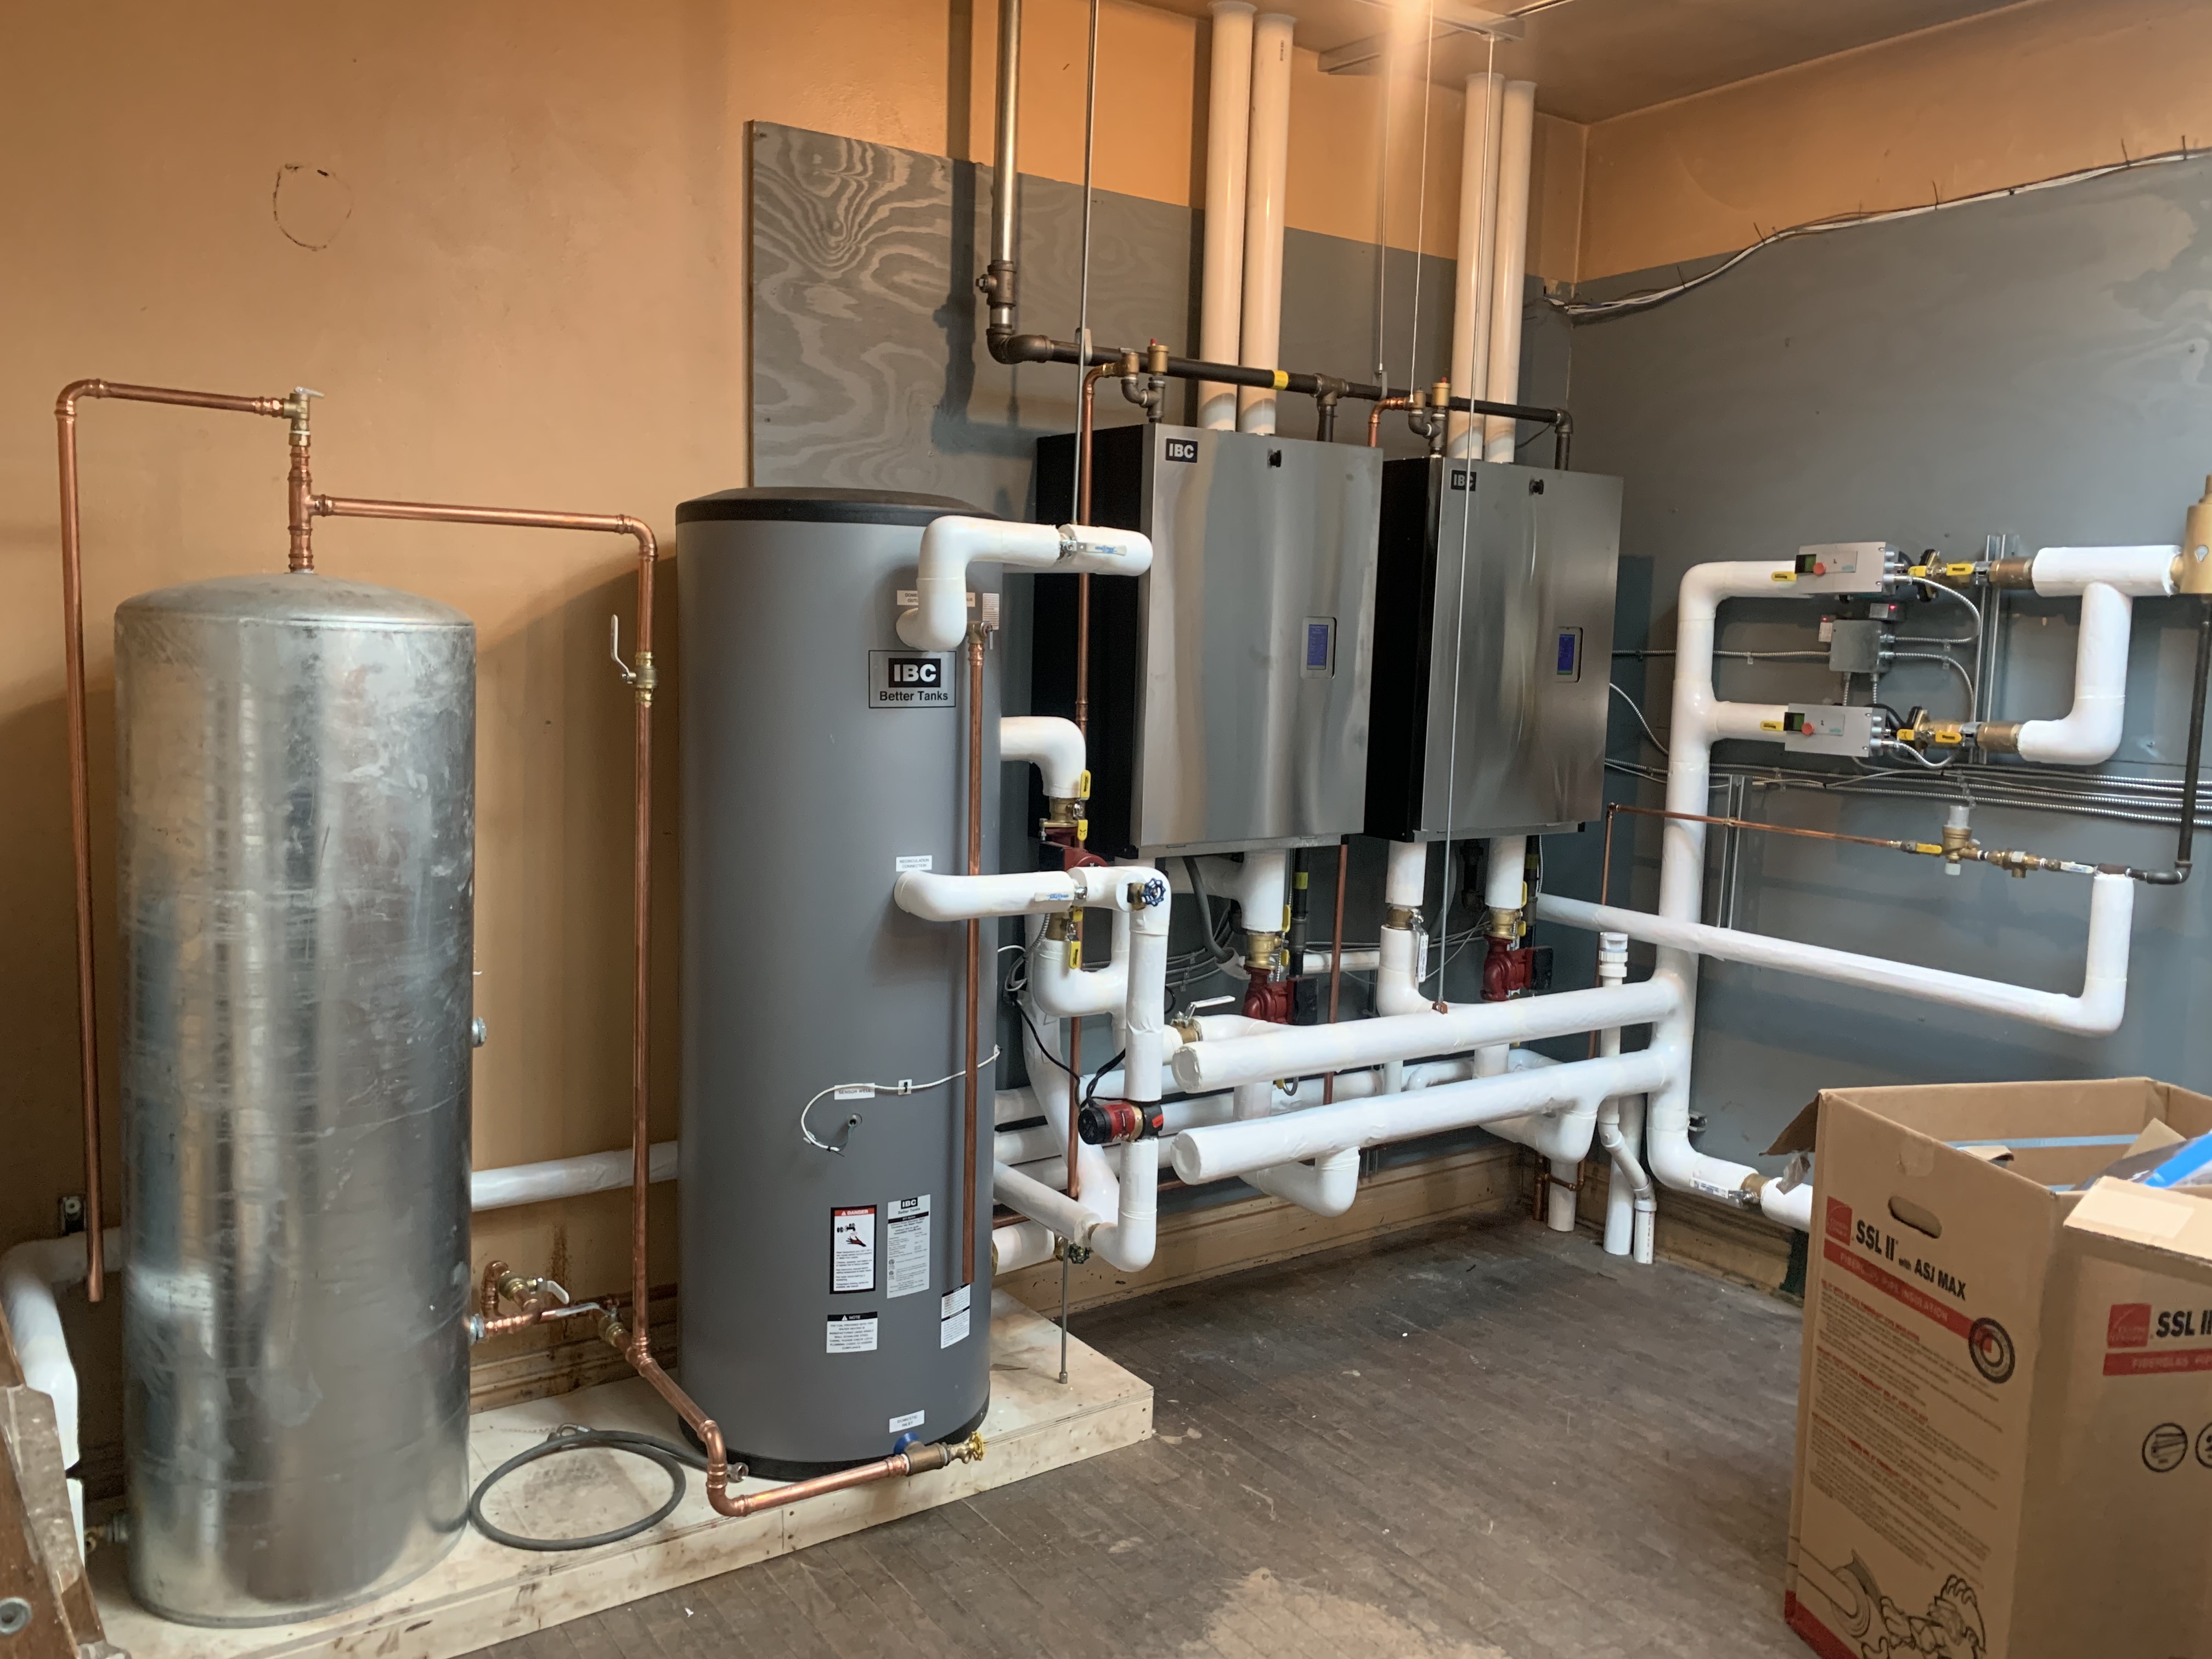 New boiler and pumps at Jack Properties building in Superior